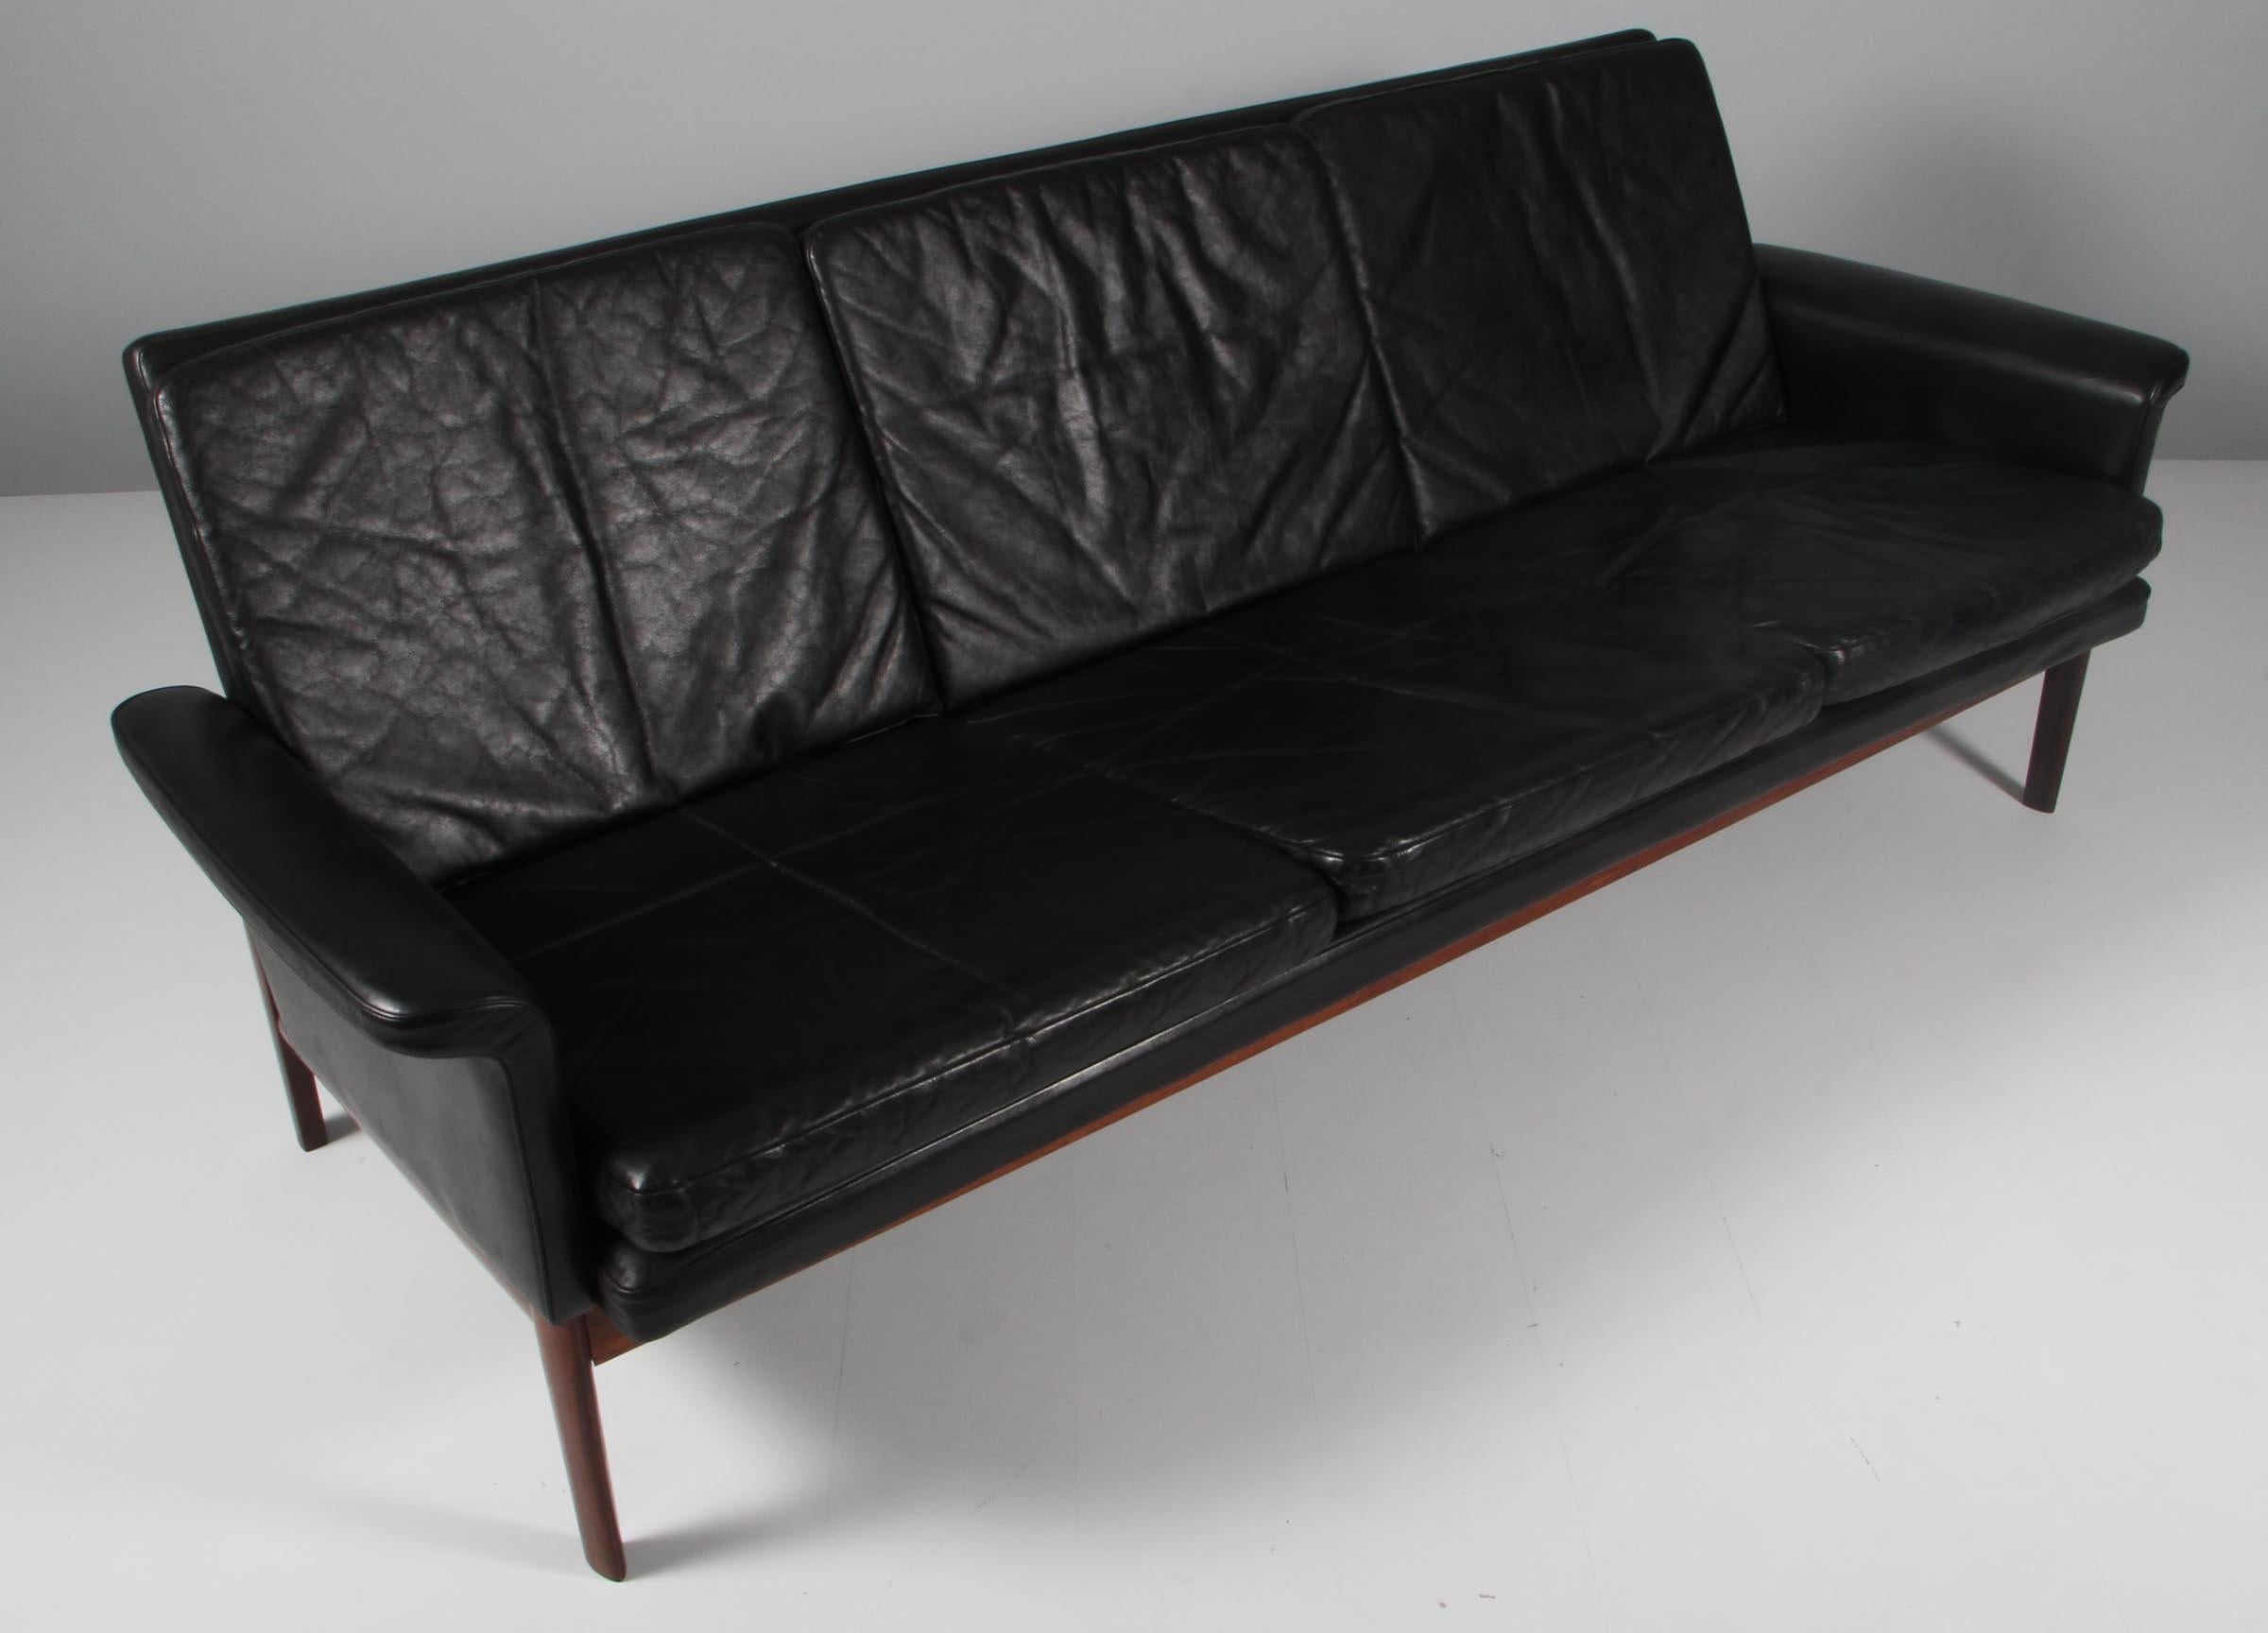 Finn Juhl three seat sofa with original black leather upholstery with a wonderful patina. 

Frame of solid rosewood, with great details.

Model 218/3 from the Jupiter Series, made by France & Daverkosen.